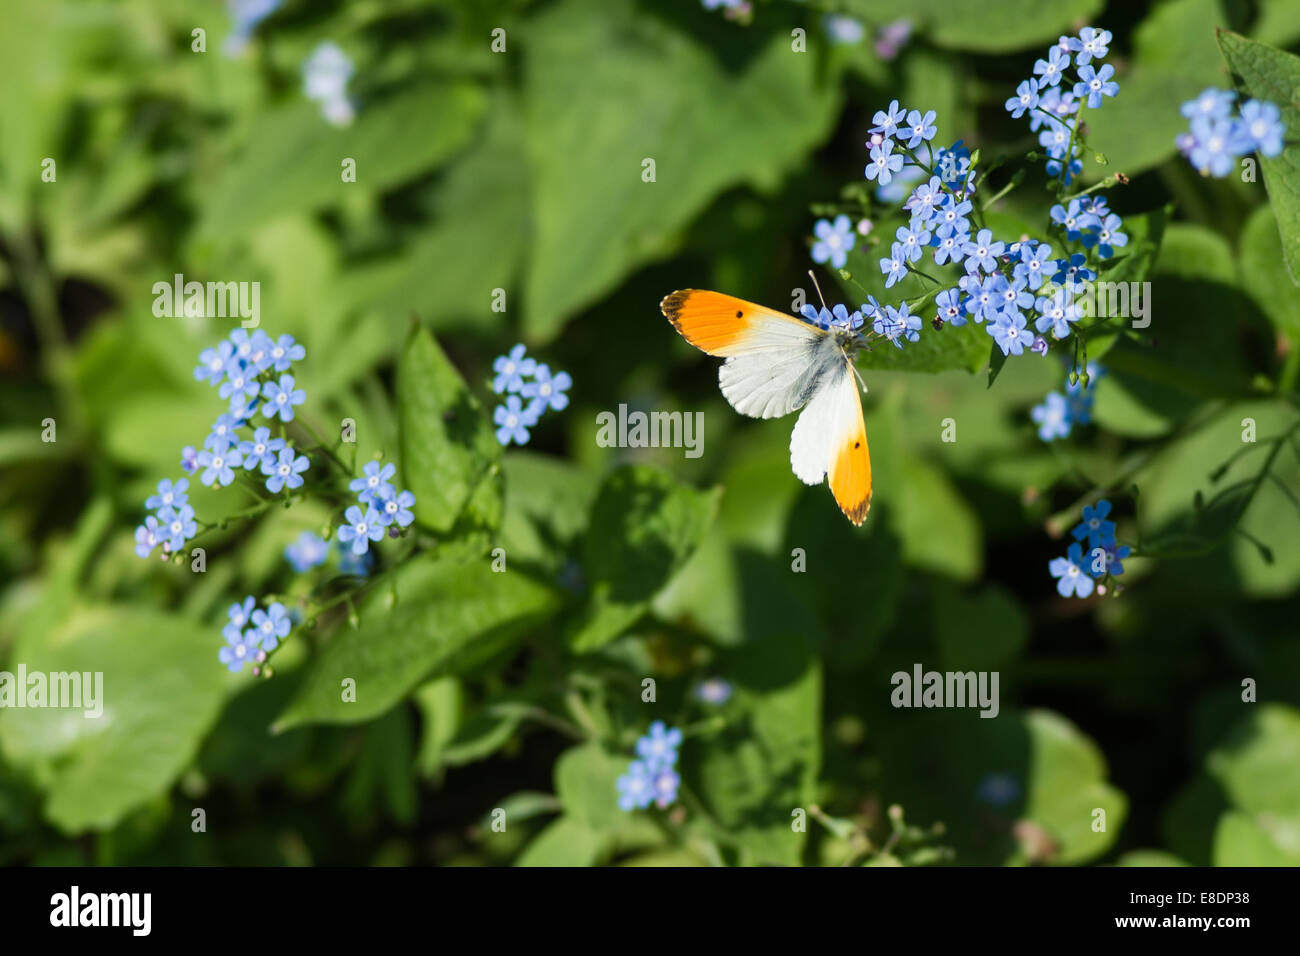 Hebomoia glaucippe pieridae butterfly and blue flowers against green grass Stock Photo